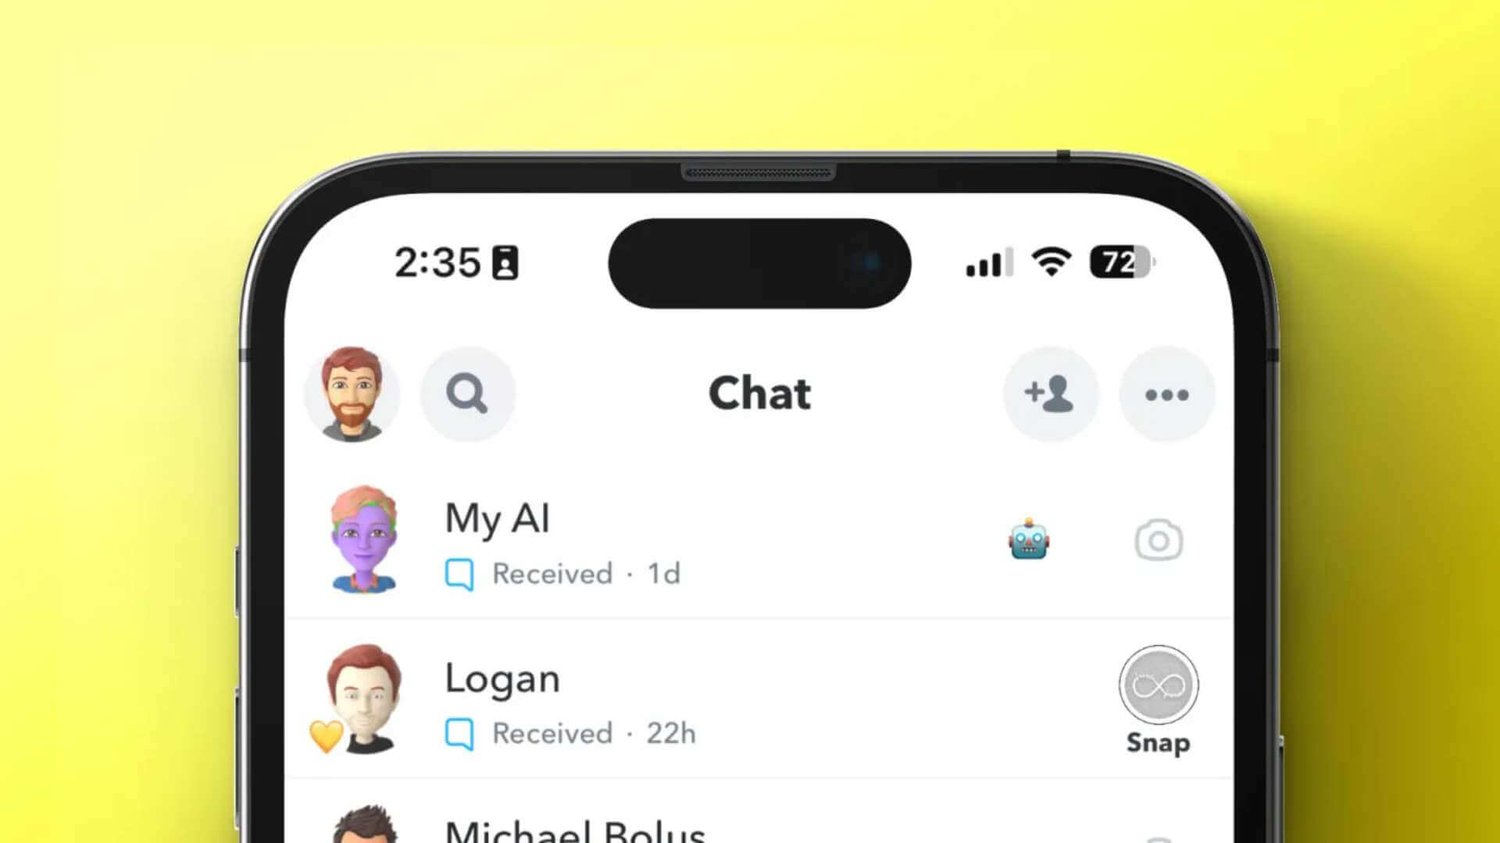 How to Get Rid of My AI on Snapchat? With Snapchat Plus